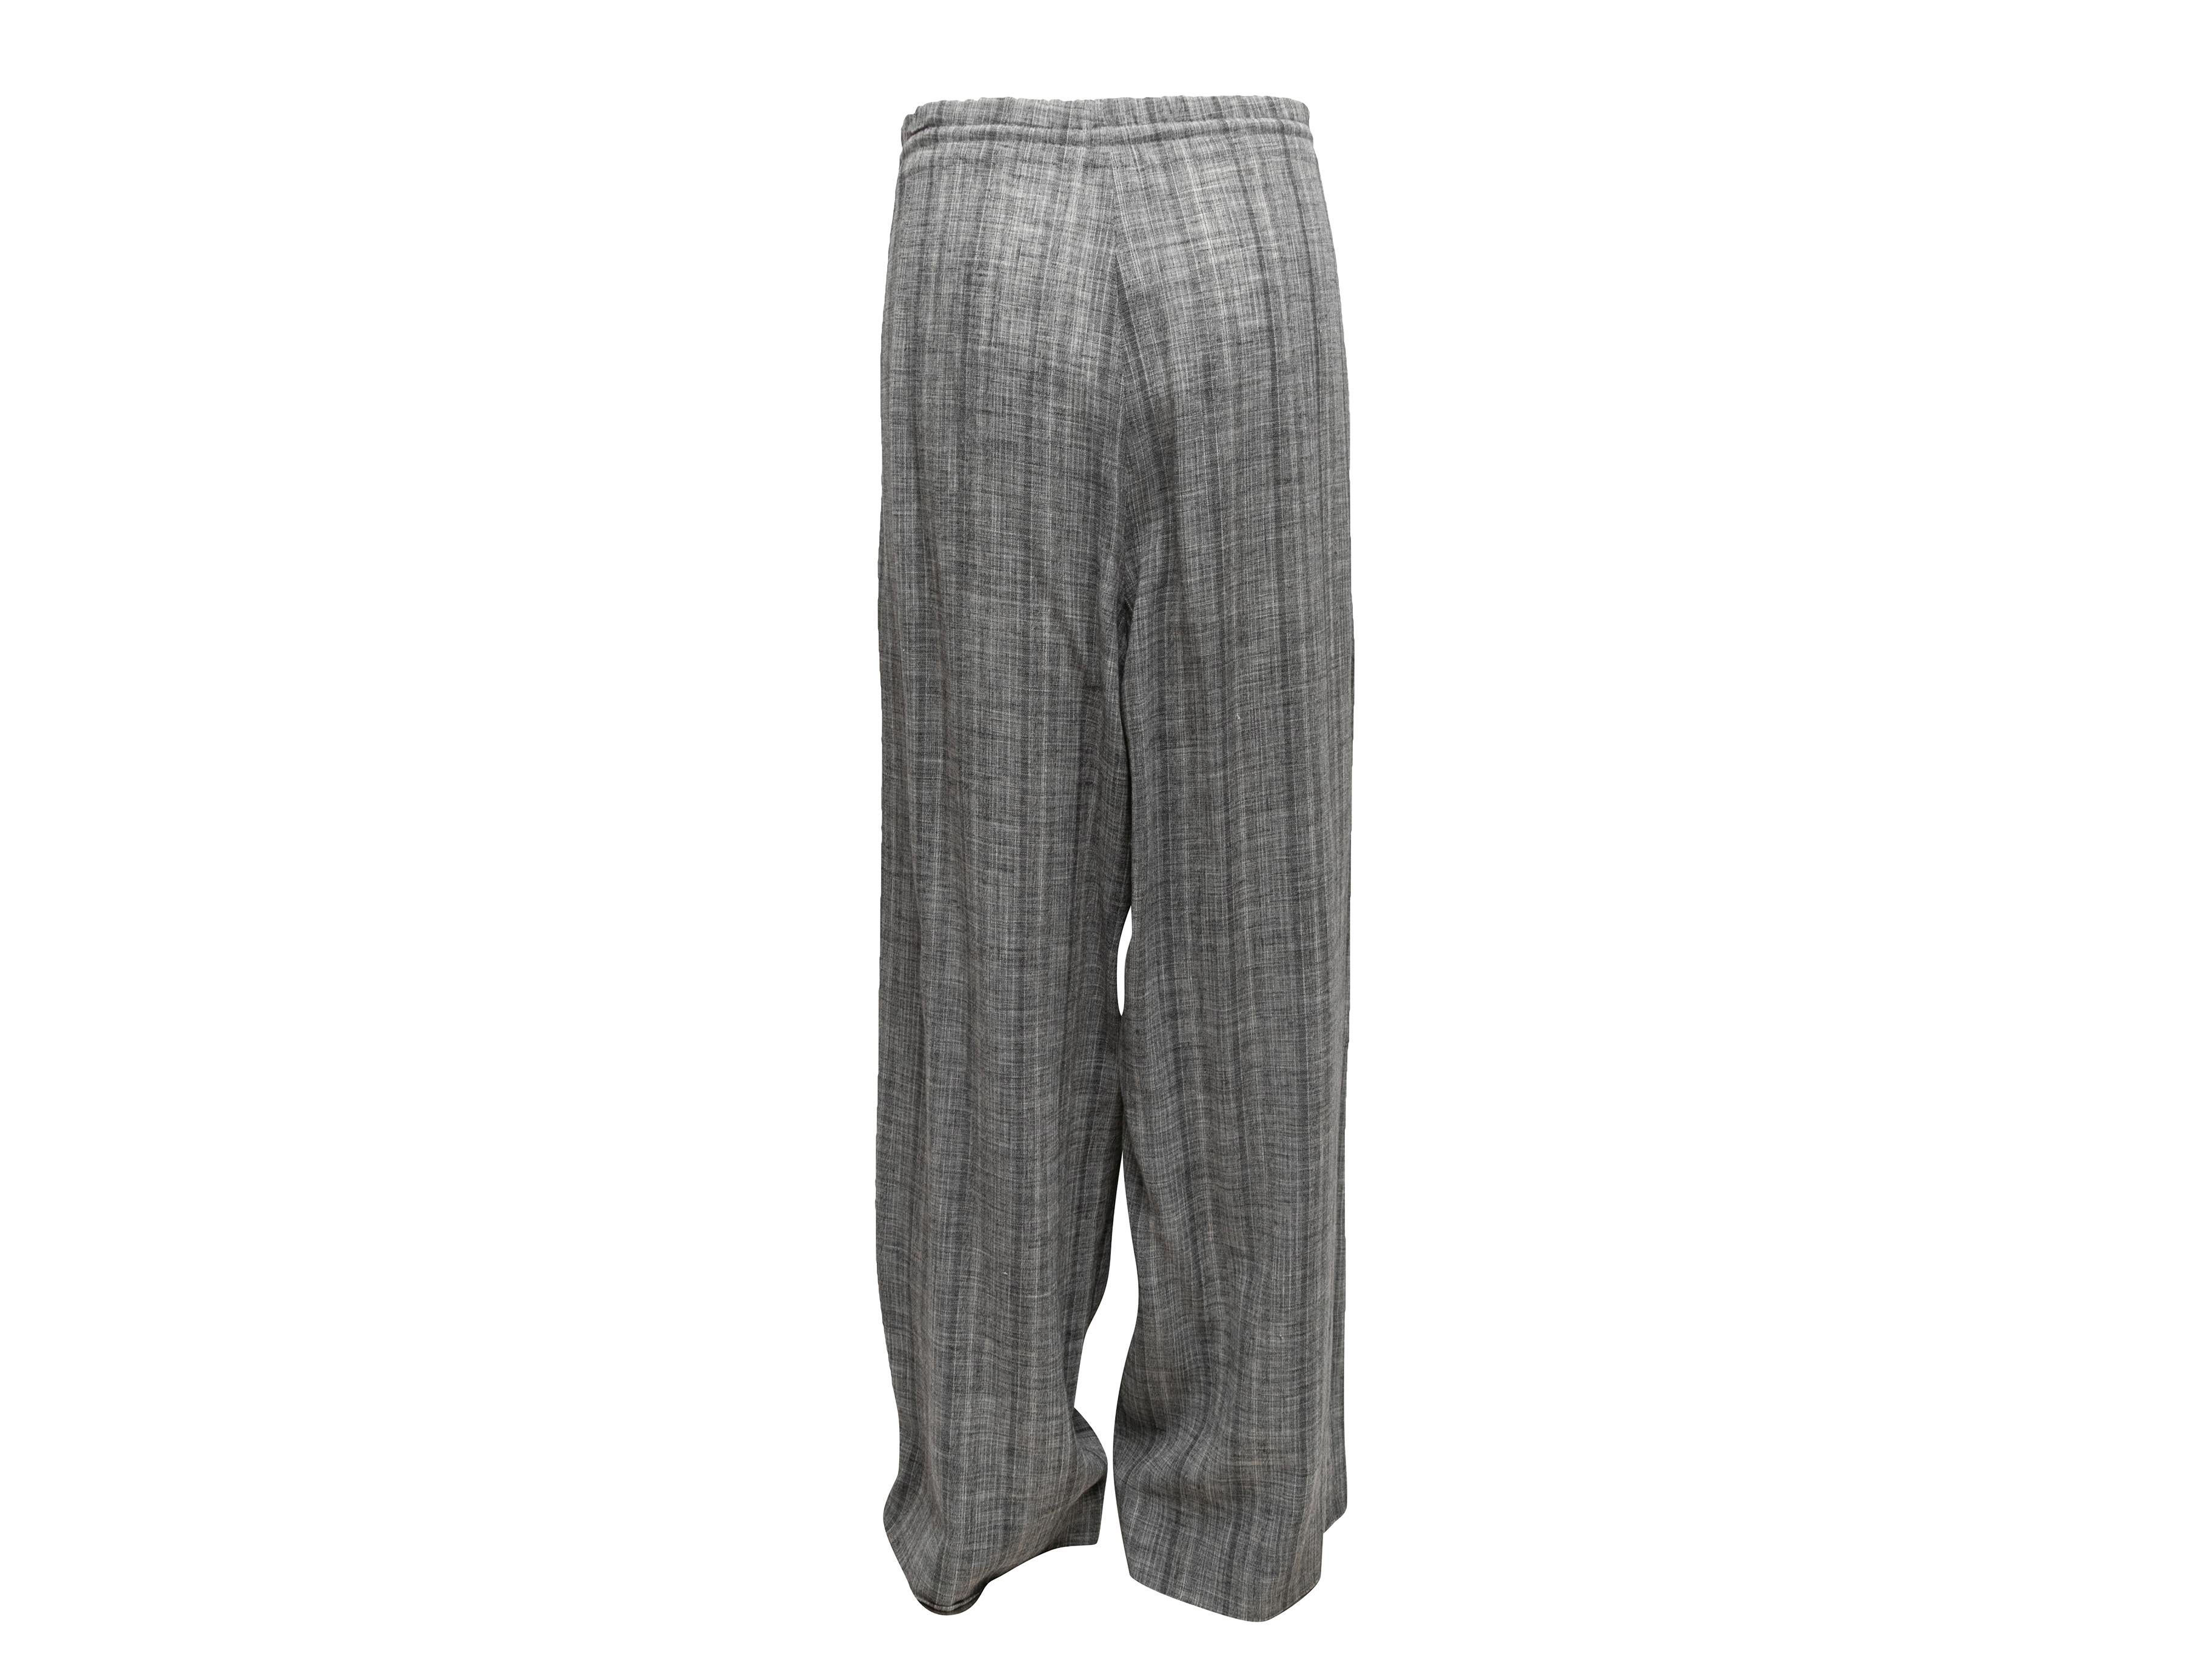 Grey Hermes Wide-Leg Pants Size EU 52 In Good Condition For Sale In New York, NY